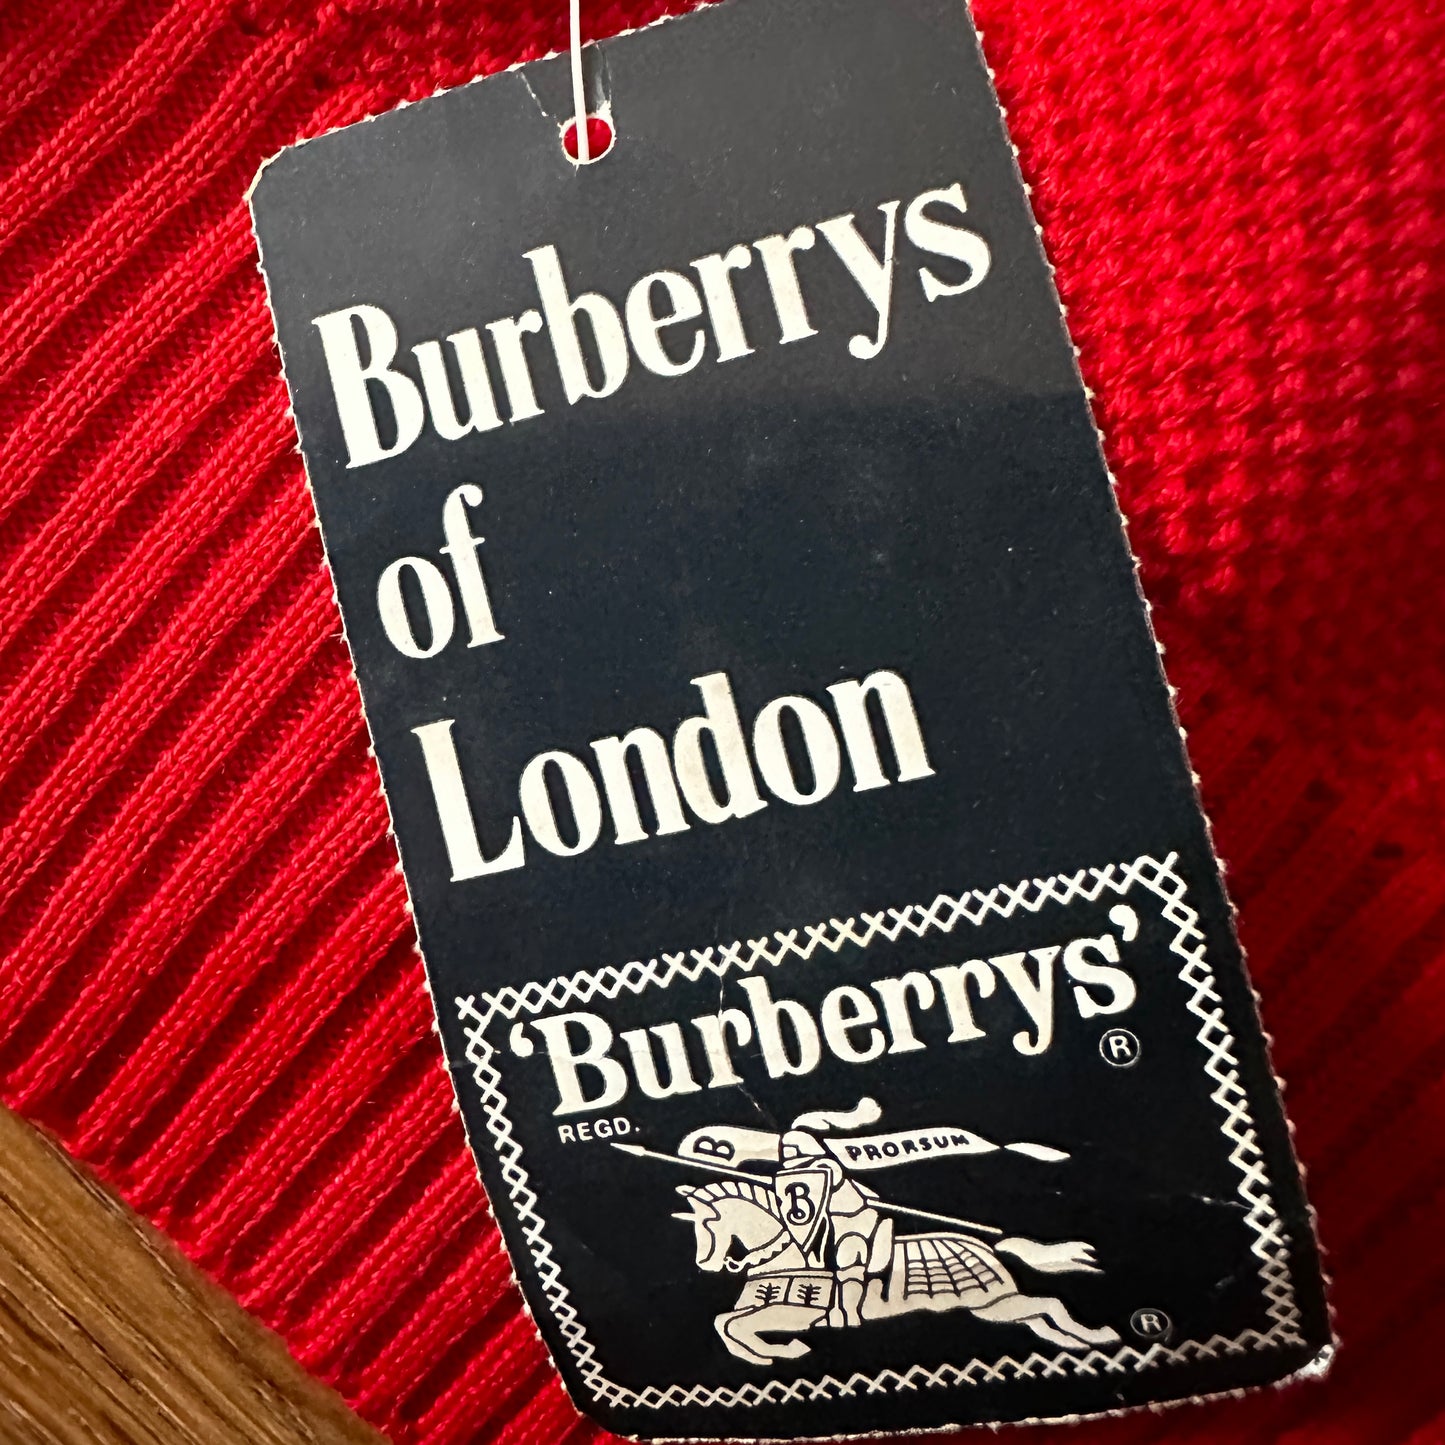 Burberrys Vintage 80s Golf Club Cardigan Red - Deadstock - 7 / XL - Made in Spain